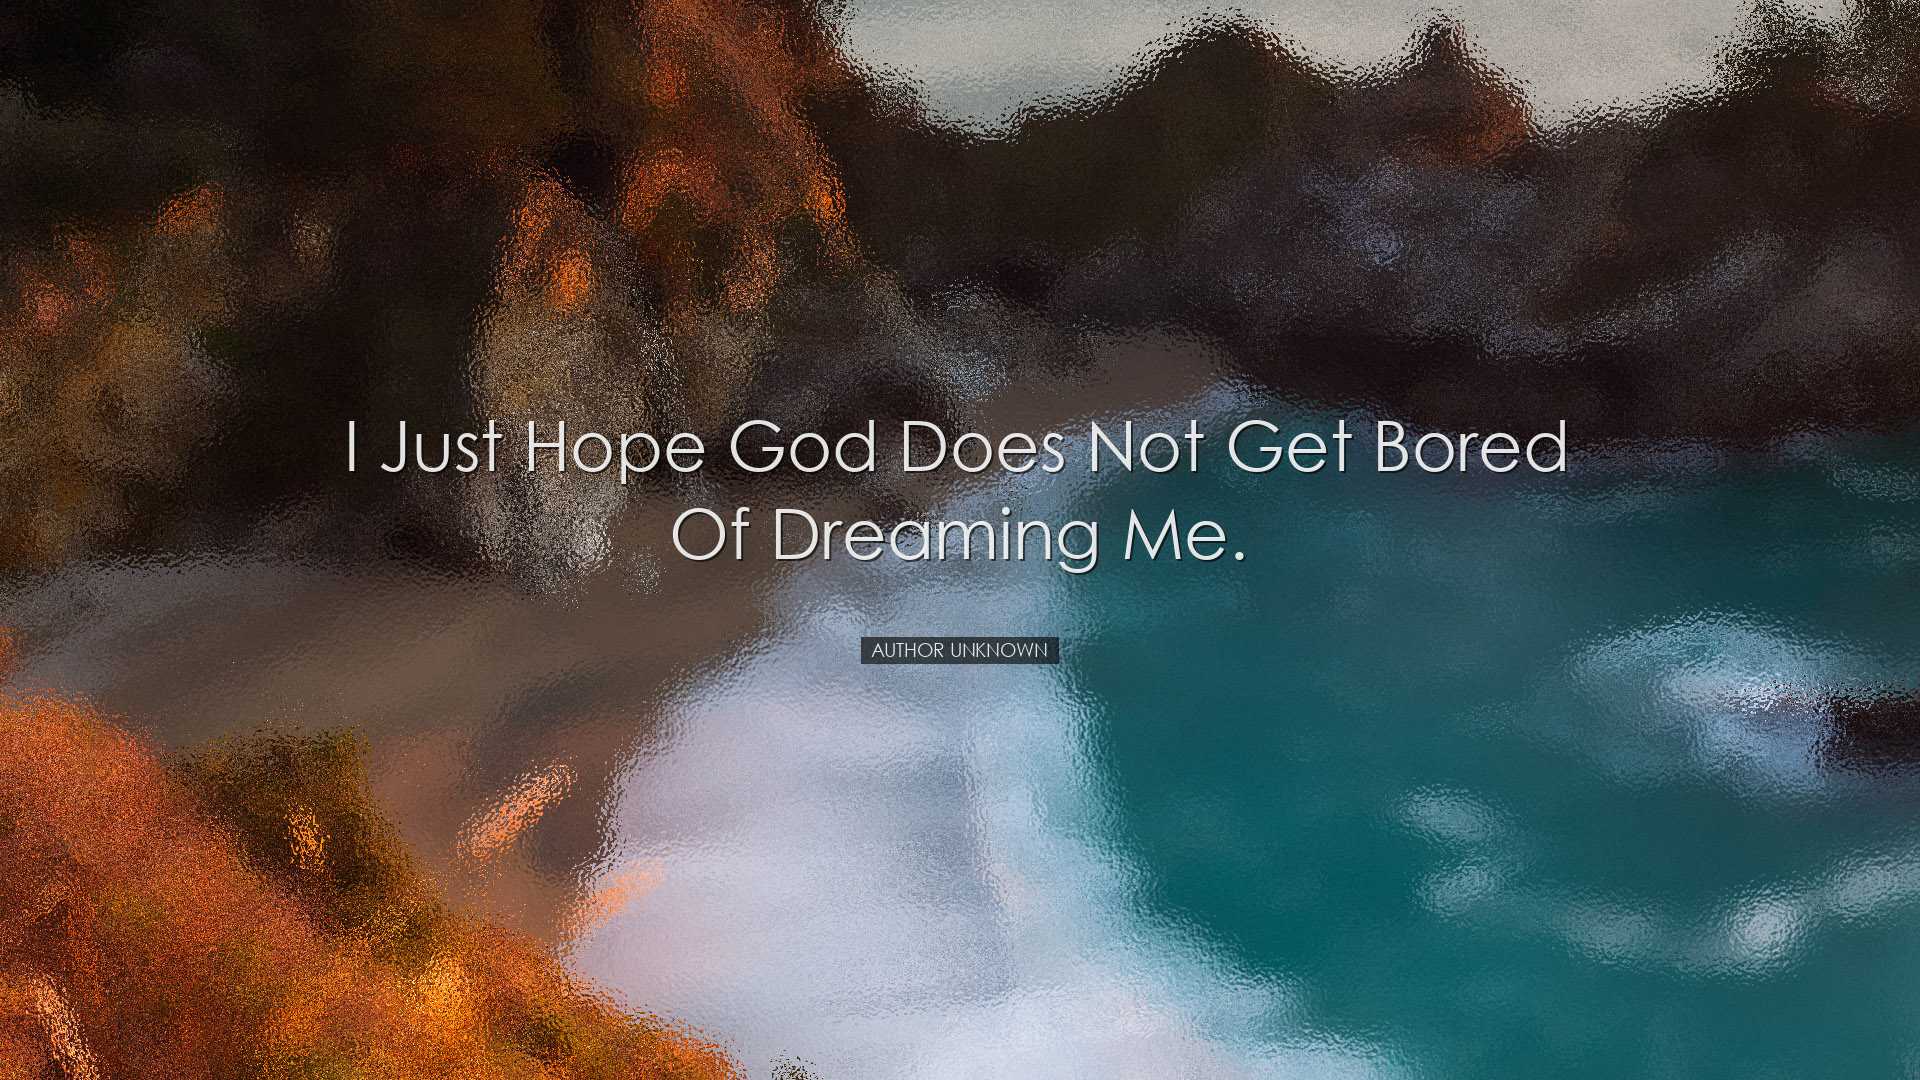 I just hope God does not get bored of dreaming me. - Author Unknow